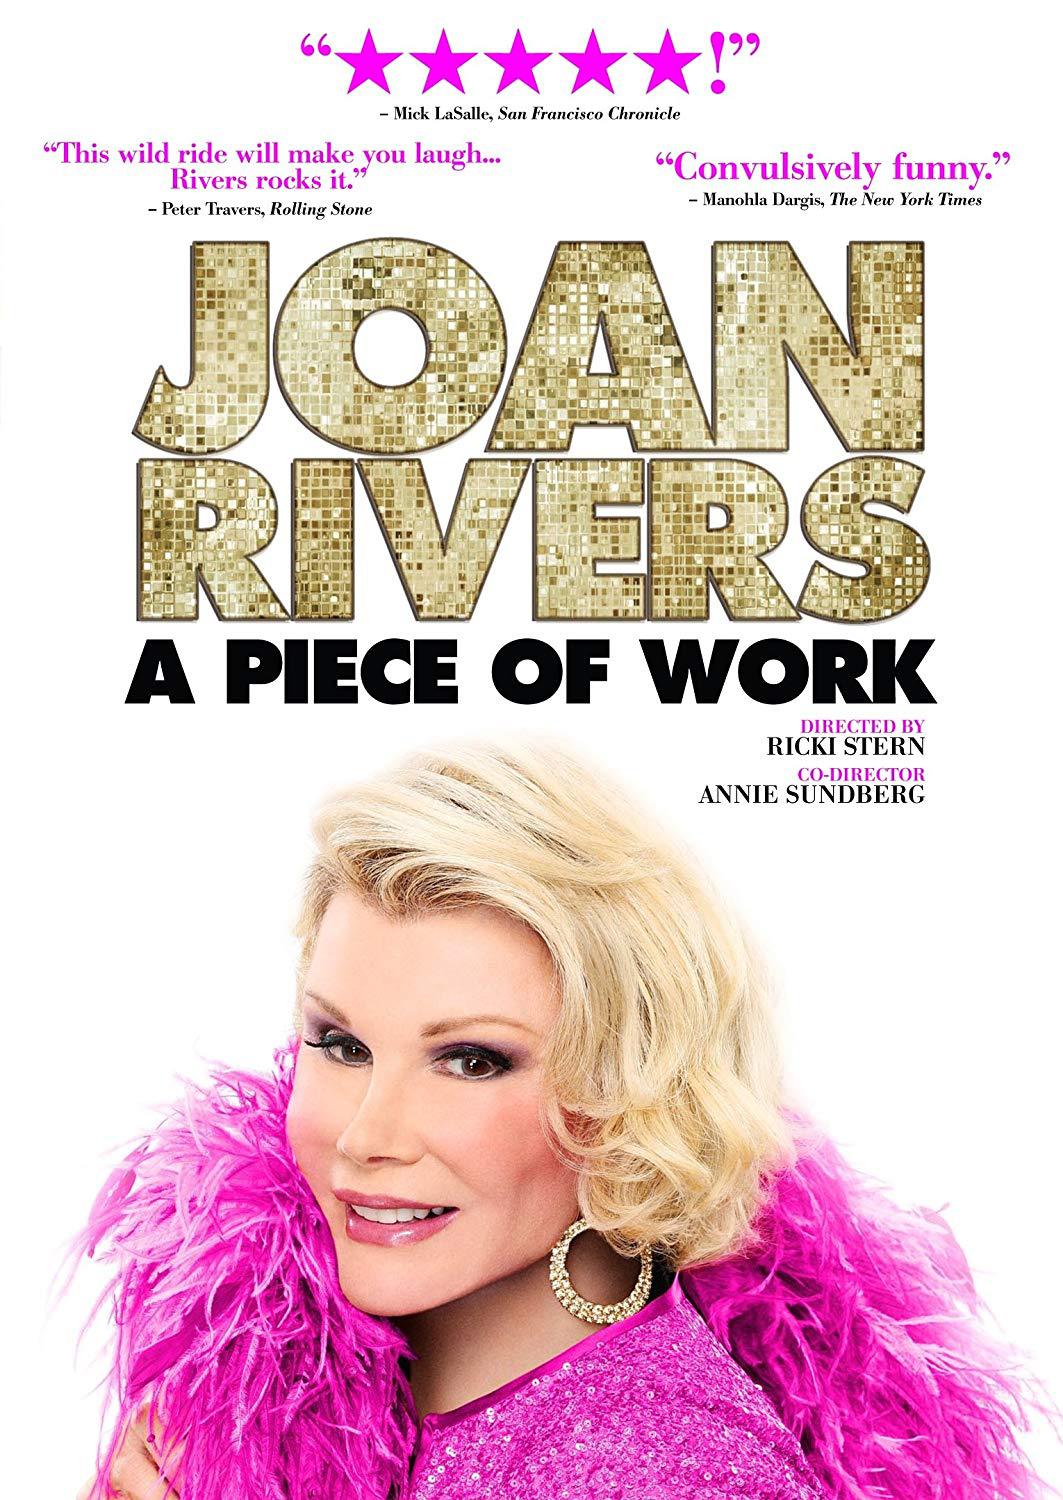 Joan Rivers: A Piece of Work